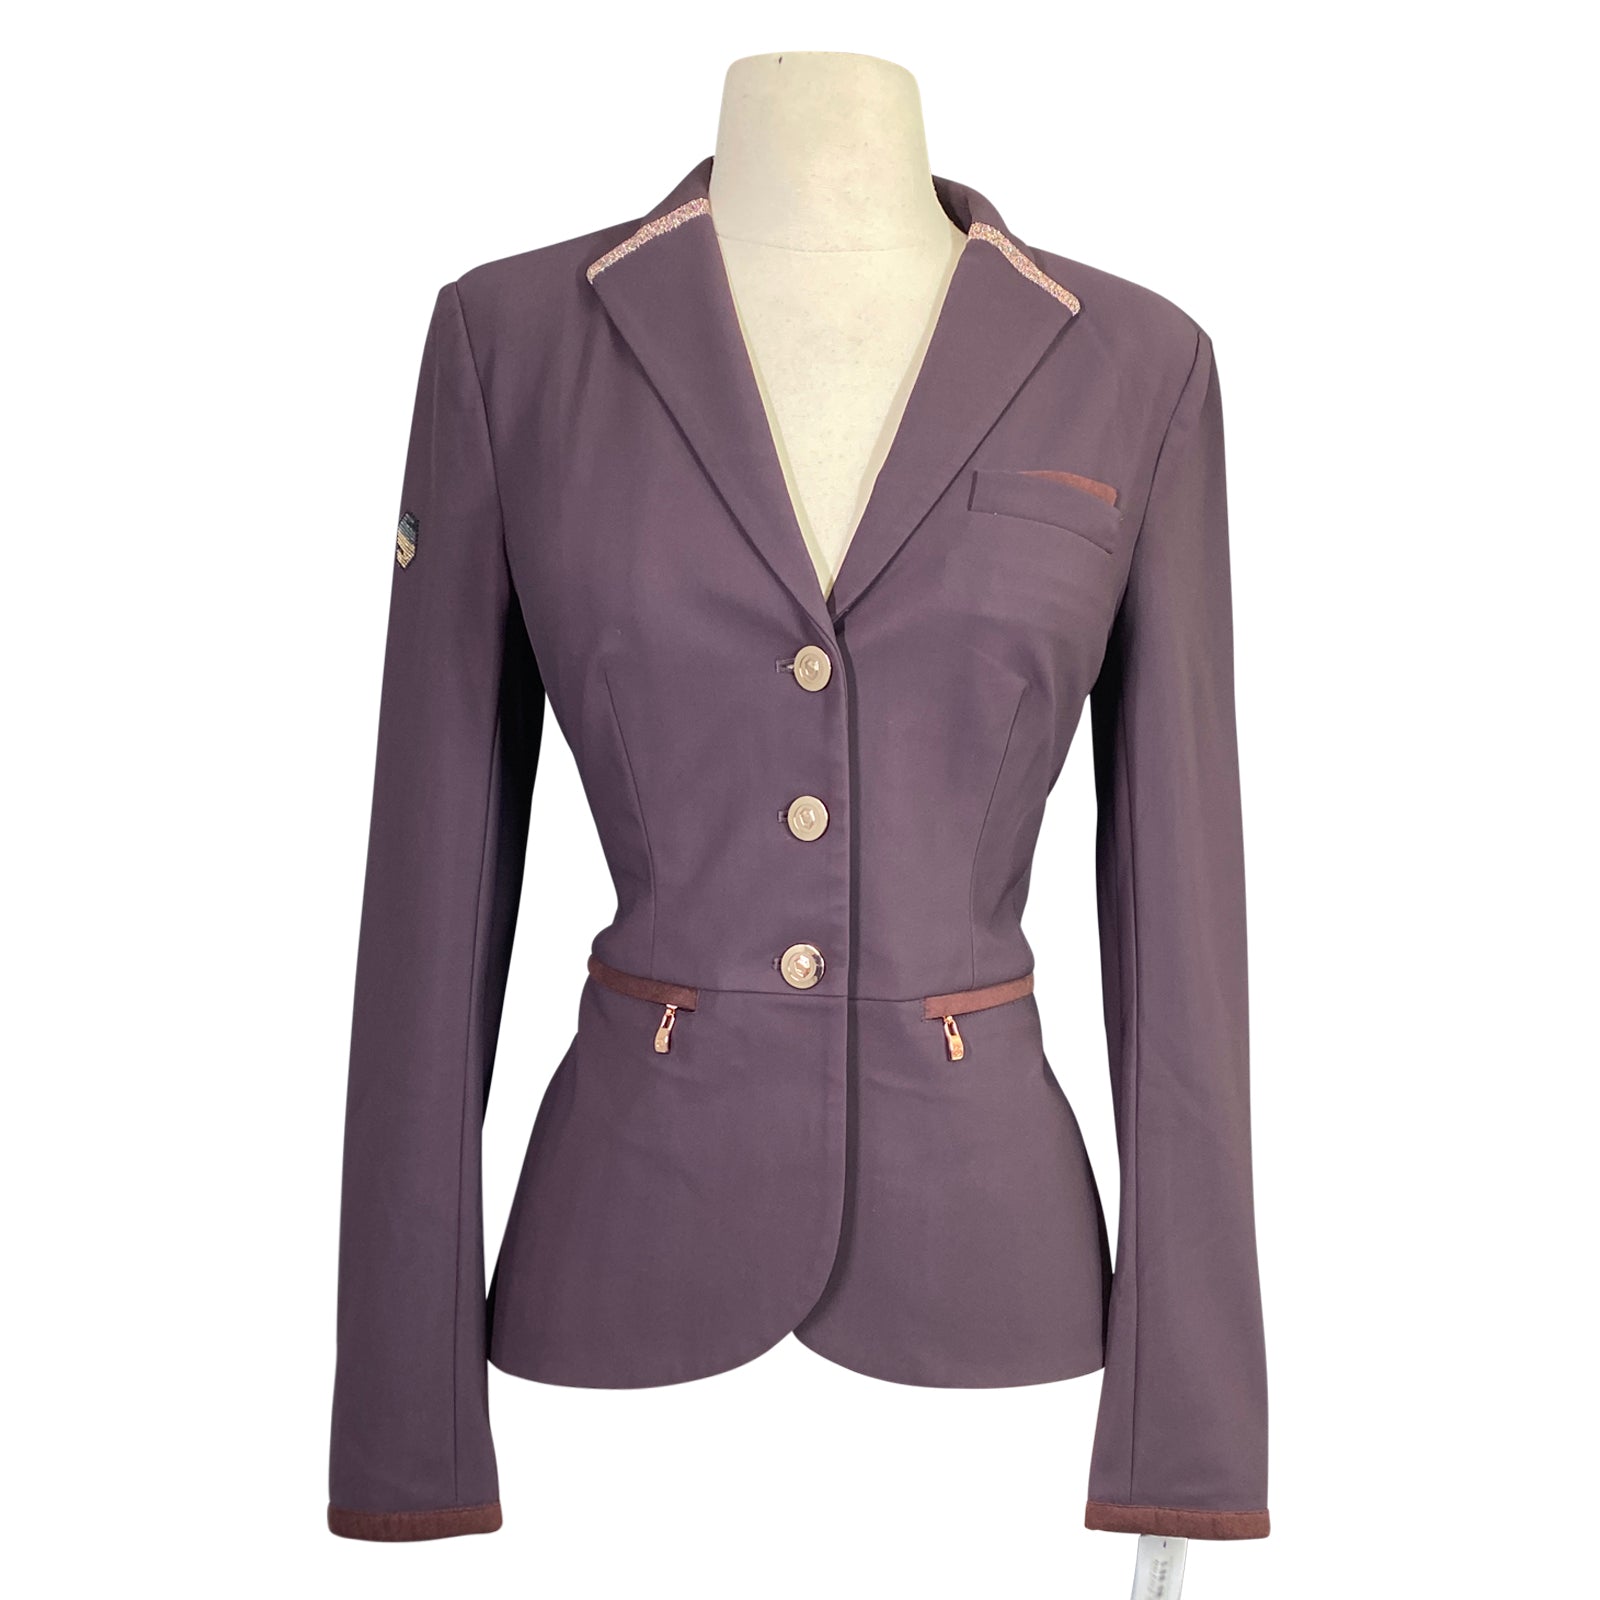 Front of Samshield 'Victorine' Crystal Fabric Competition Jacket in Aubergine/Rose Gold